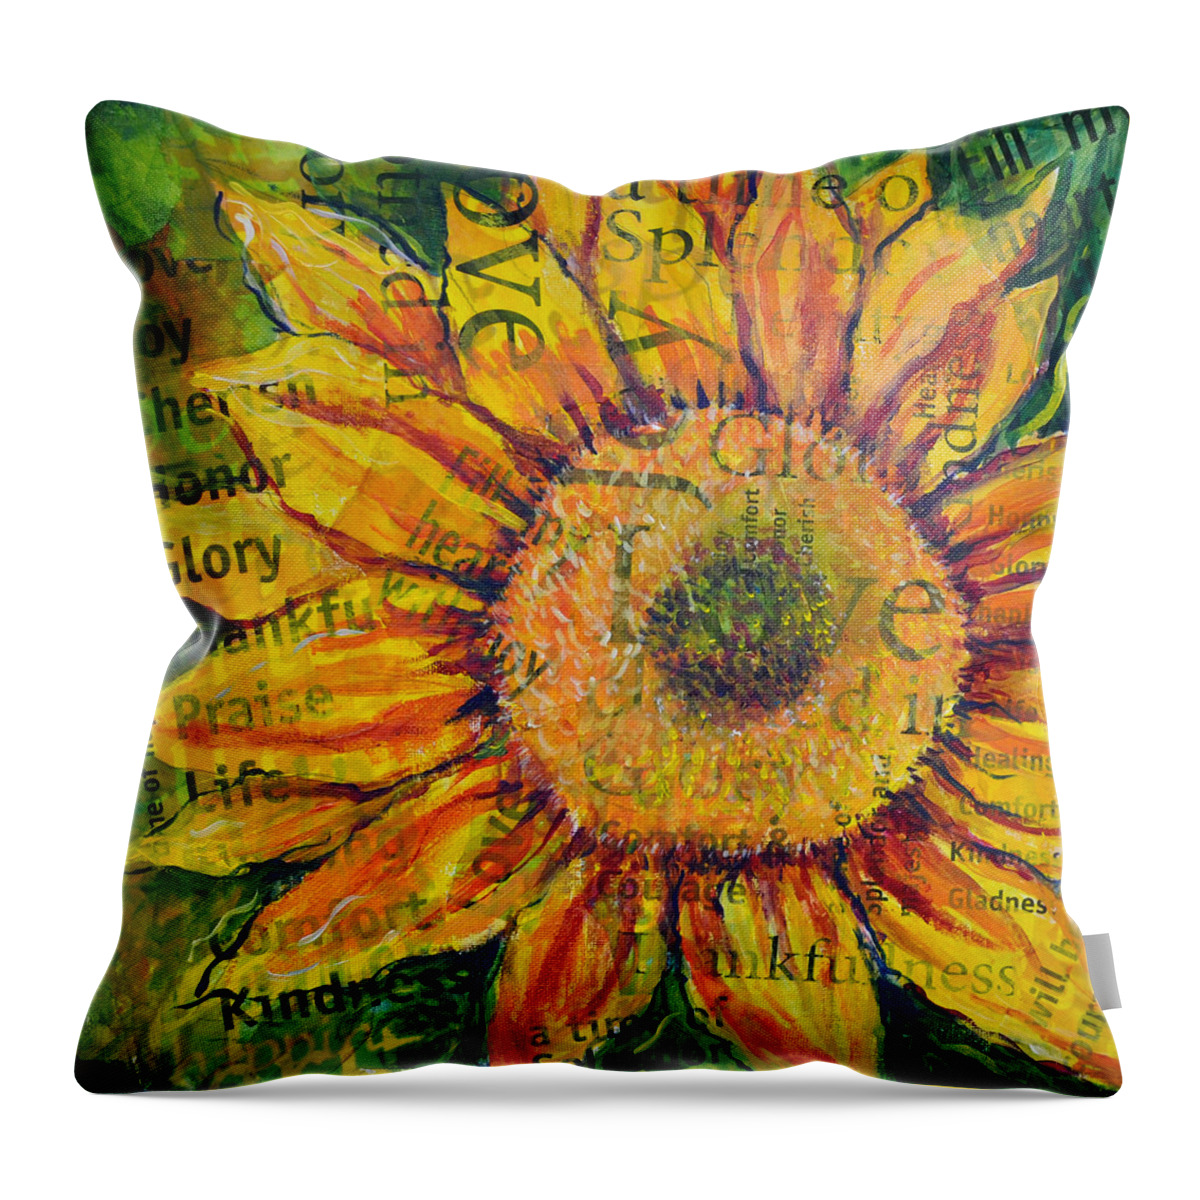 Sunflower Throw Pillow featuring the painting Sunflower Glory by Lisa Jaworski